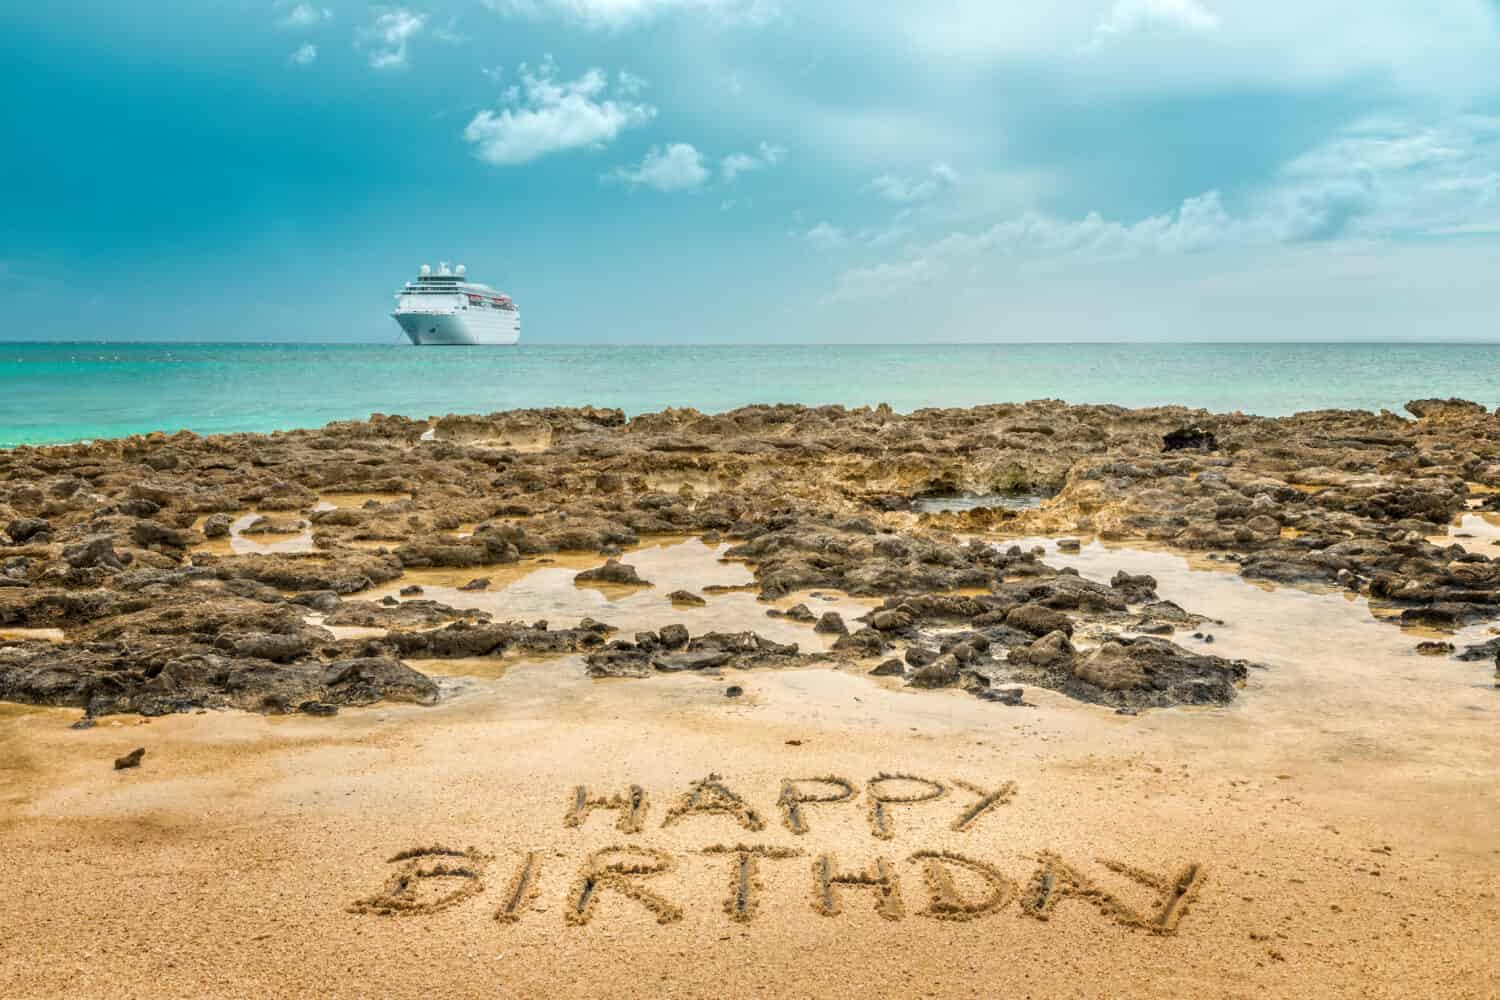 Hand written  "Happy Birthday" on the sandy beach by the ocean with a cruise ship in the background